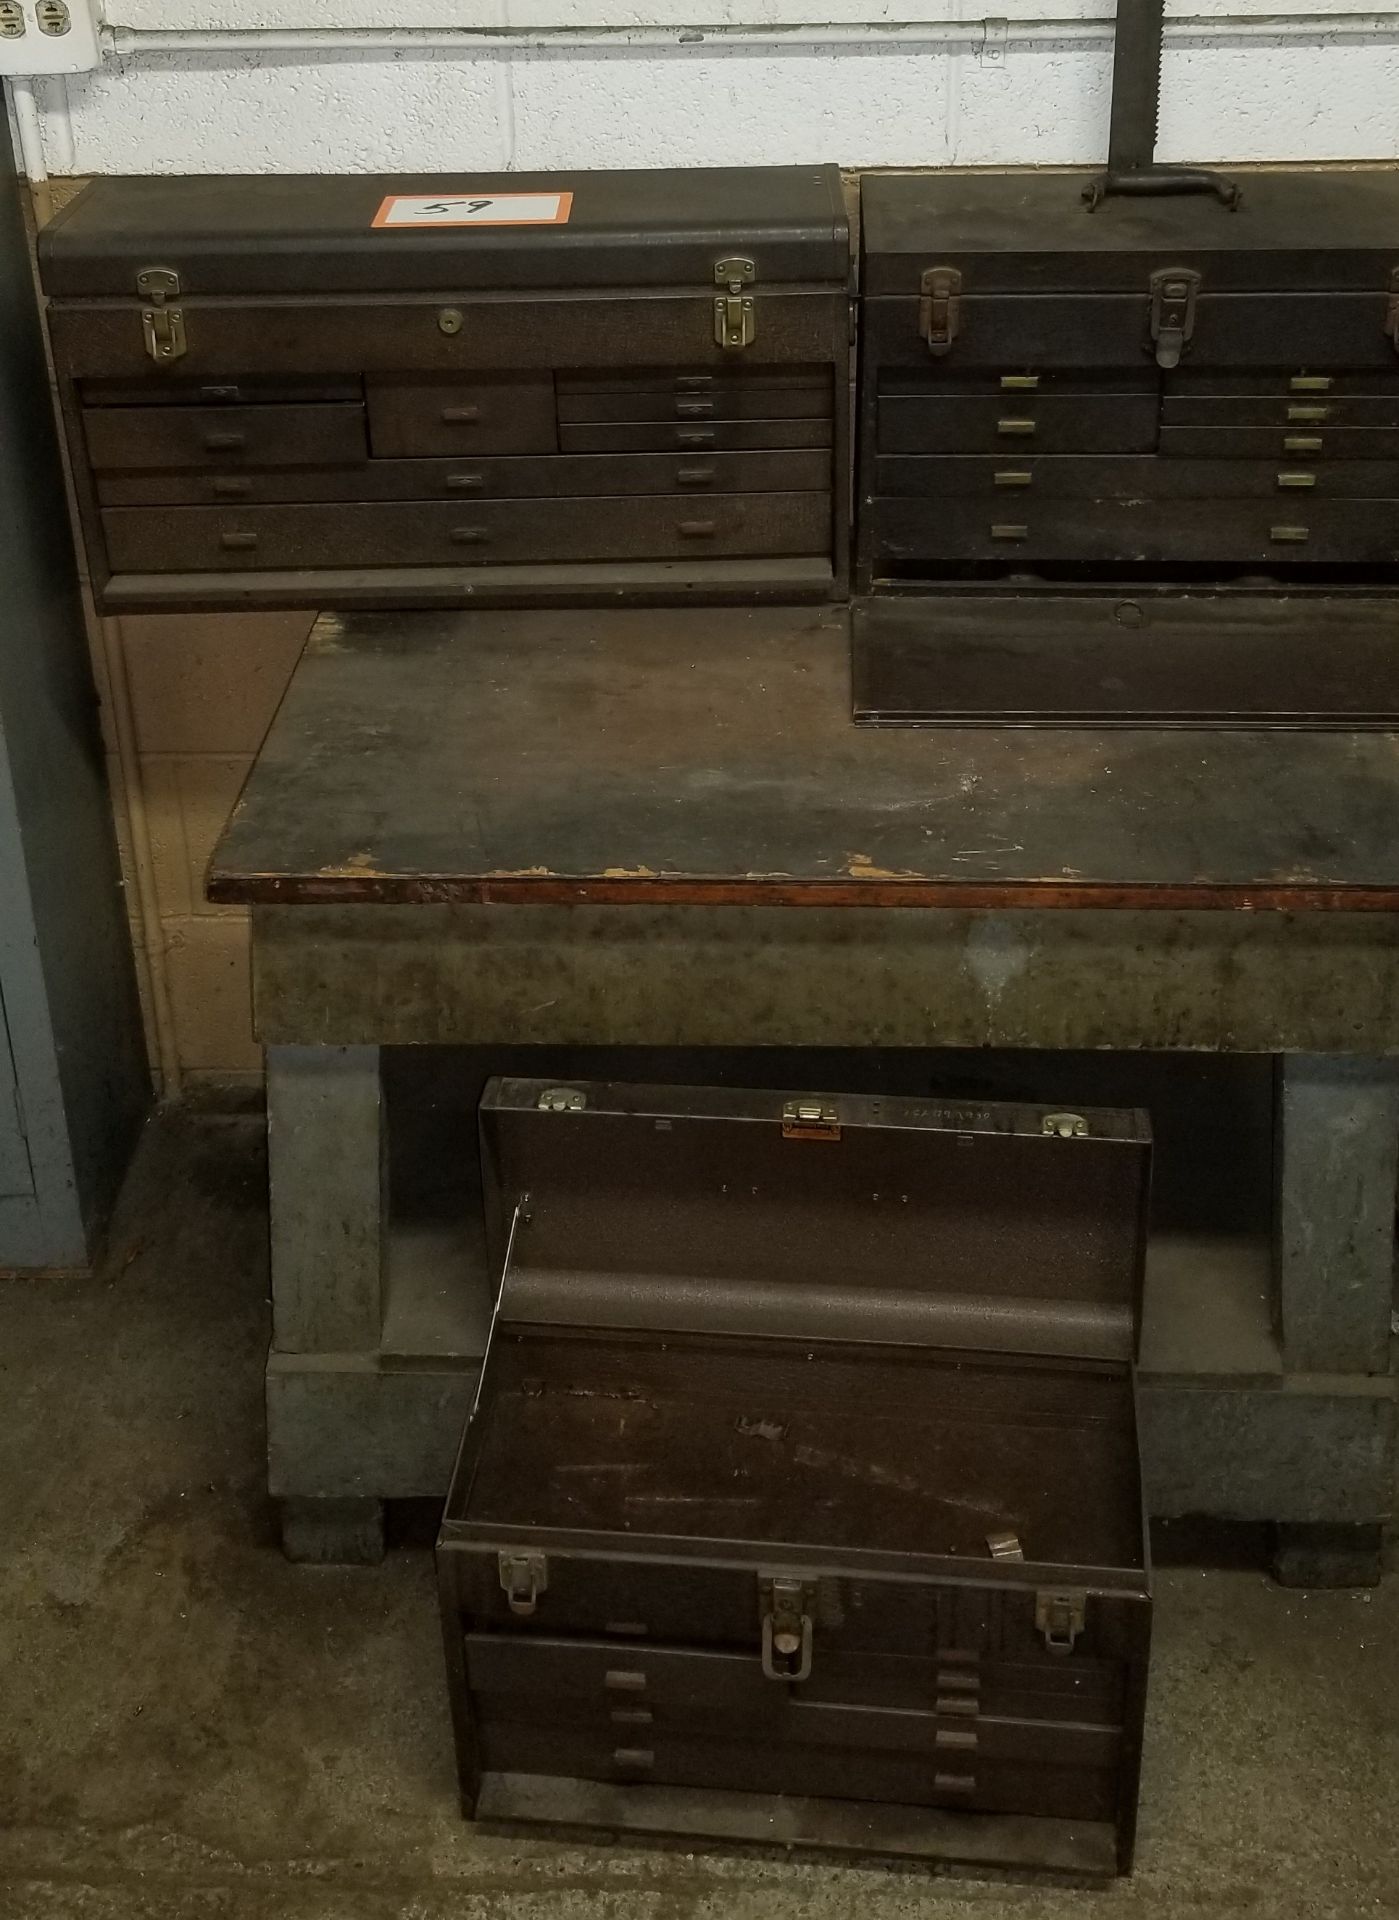 Trio of Kennedy Machinists Tool Box Chests including Kennedy 526 Top Chest - Image 2 of 3